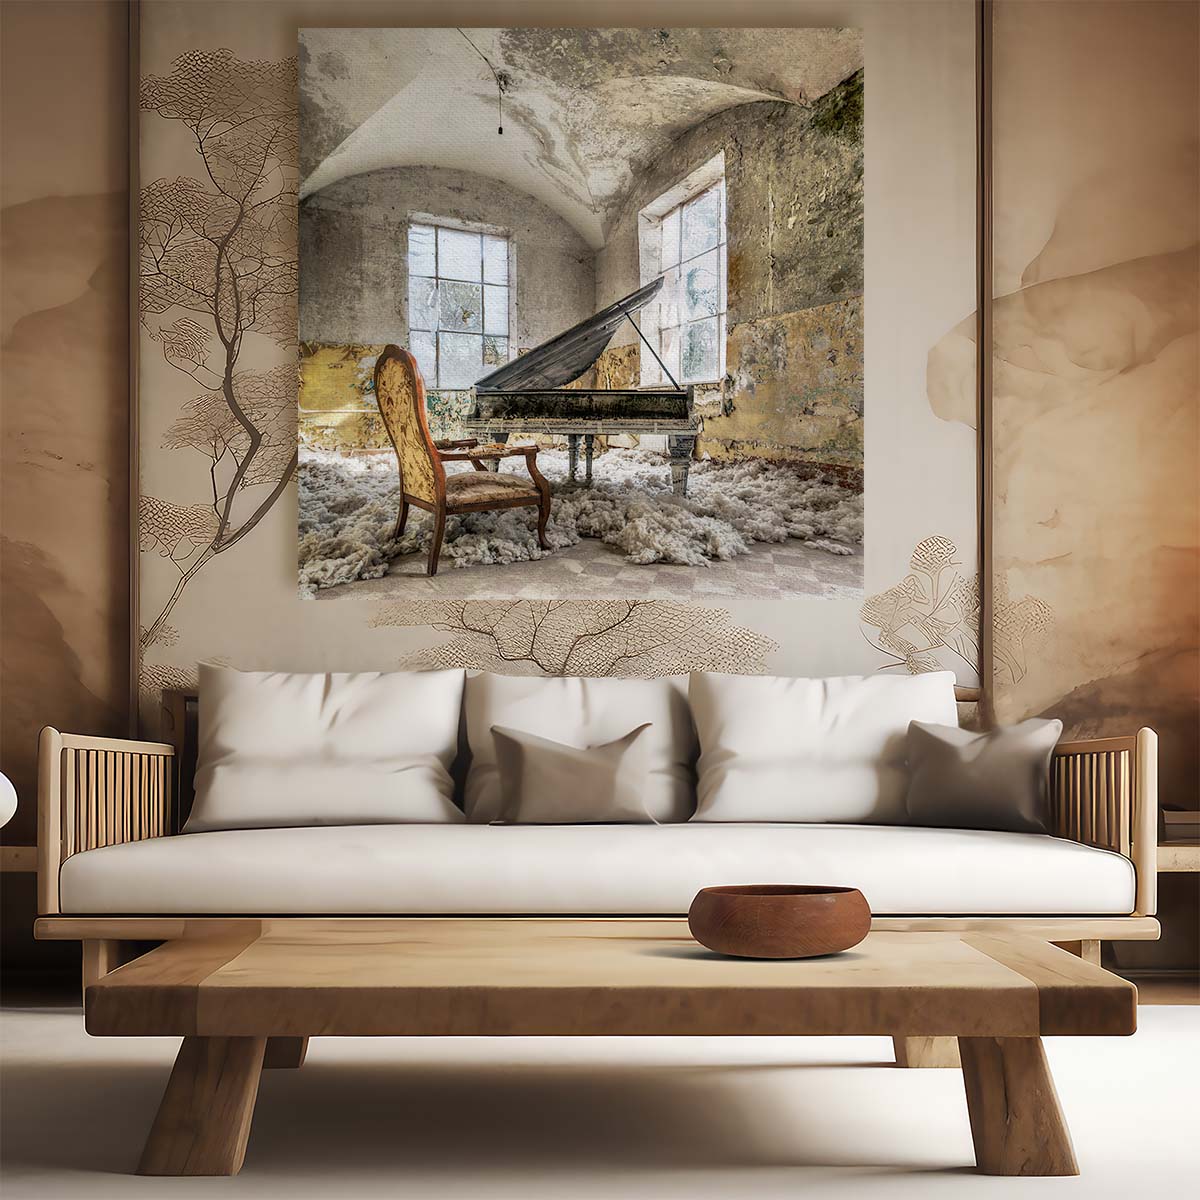 Abandoned Concert Hall Vintage Piano Decay Photography Wall Art by Luxuriance Designs. Made in USA.